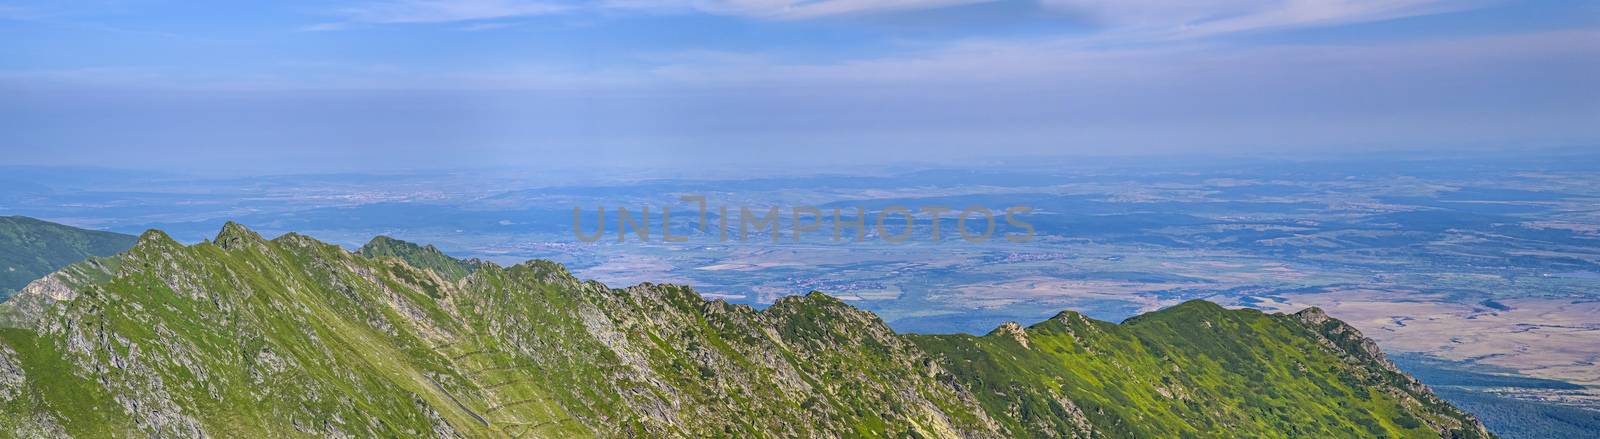 Summer panorama from mountain summit by savcoco